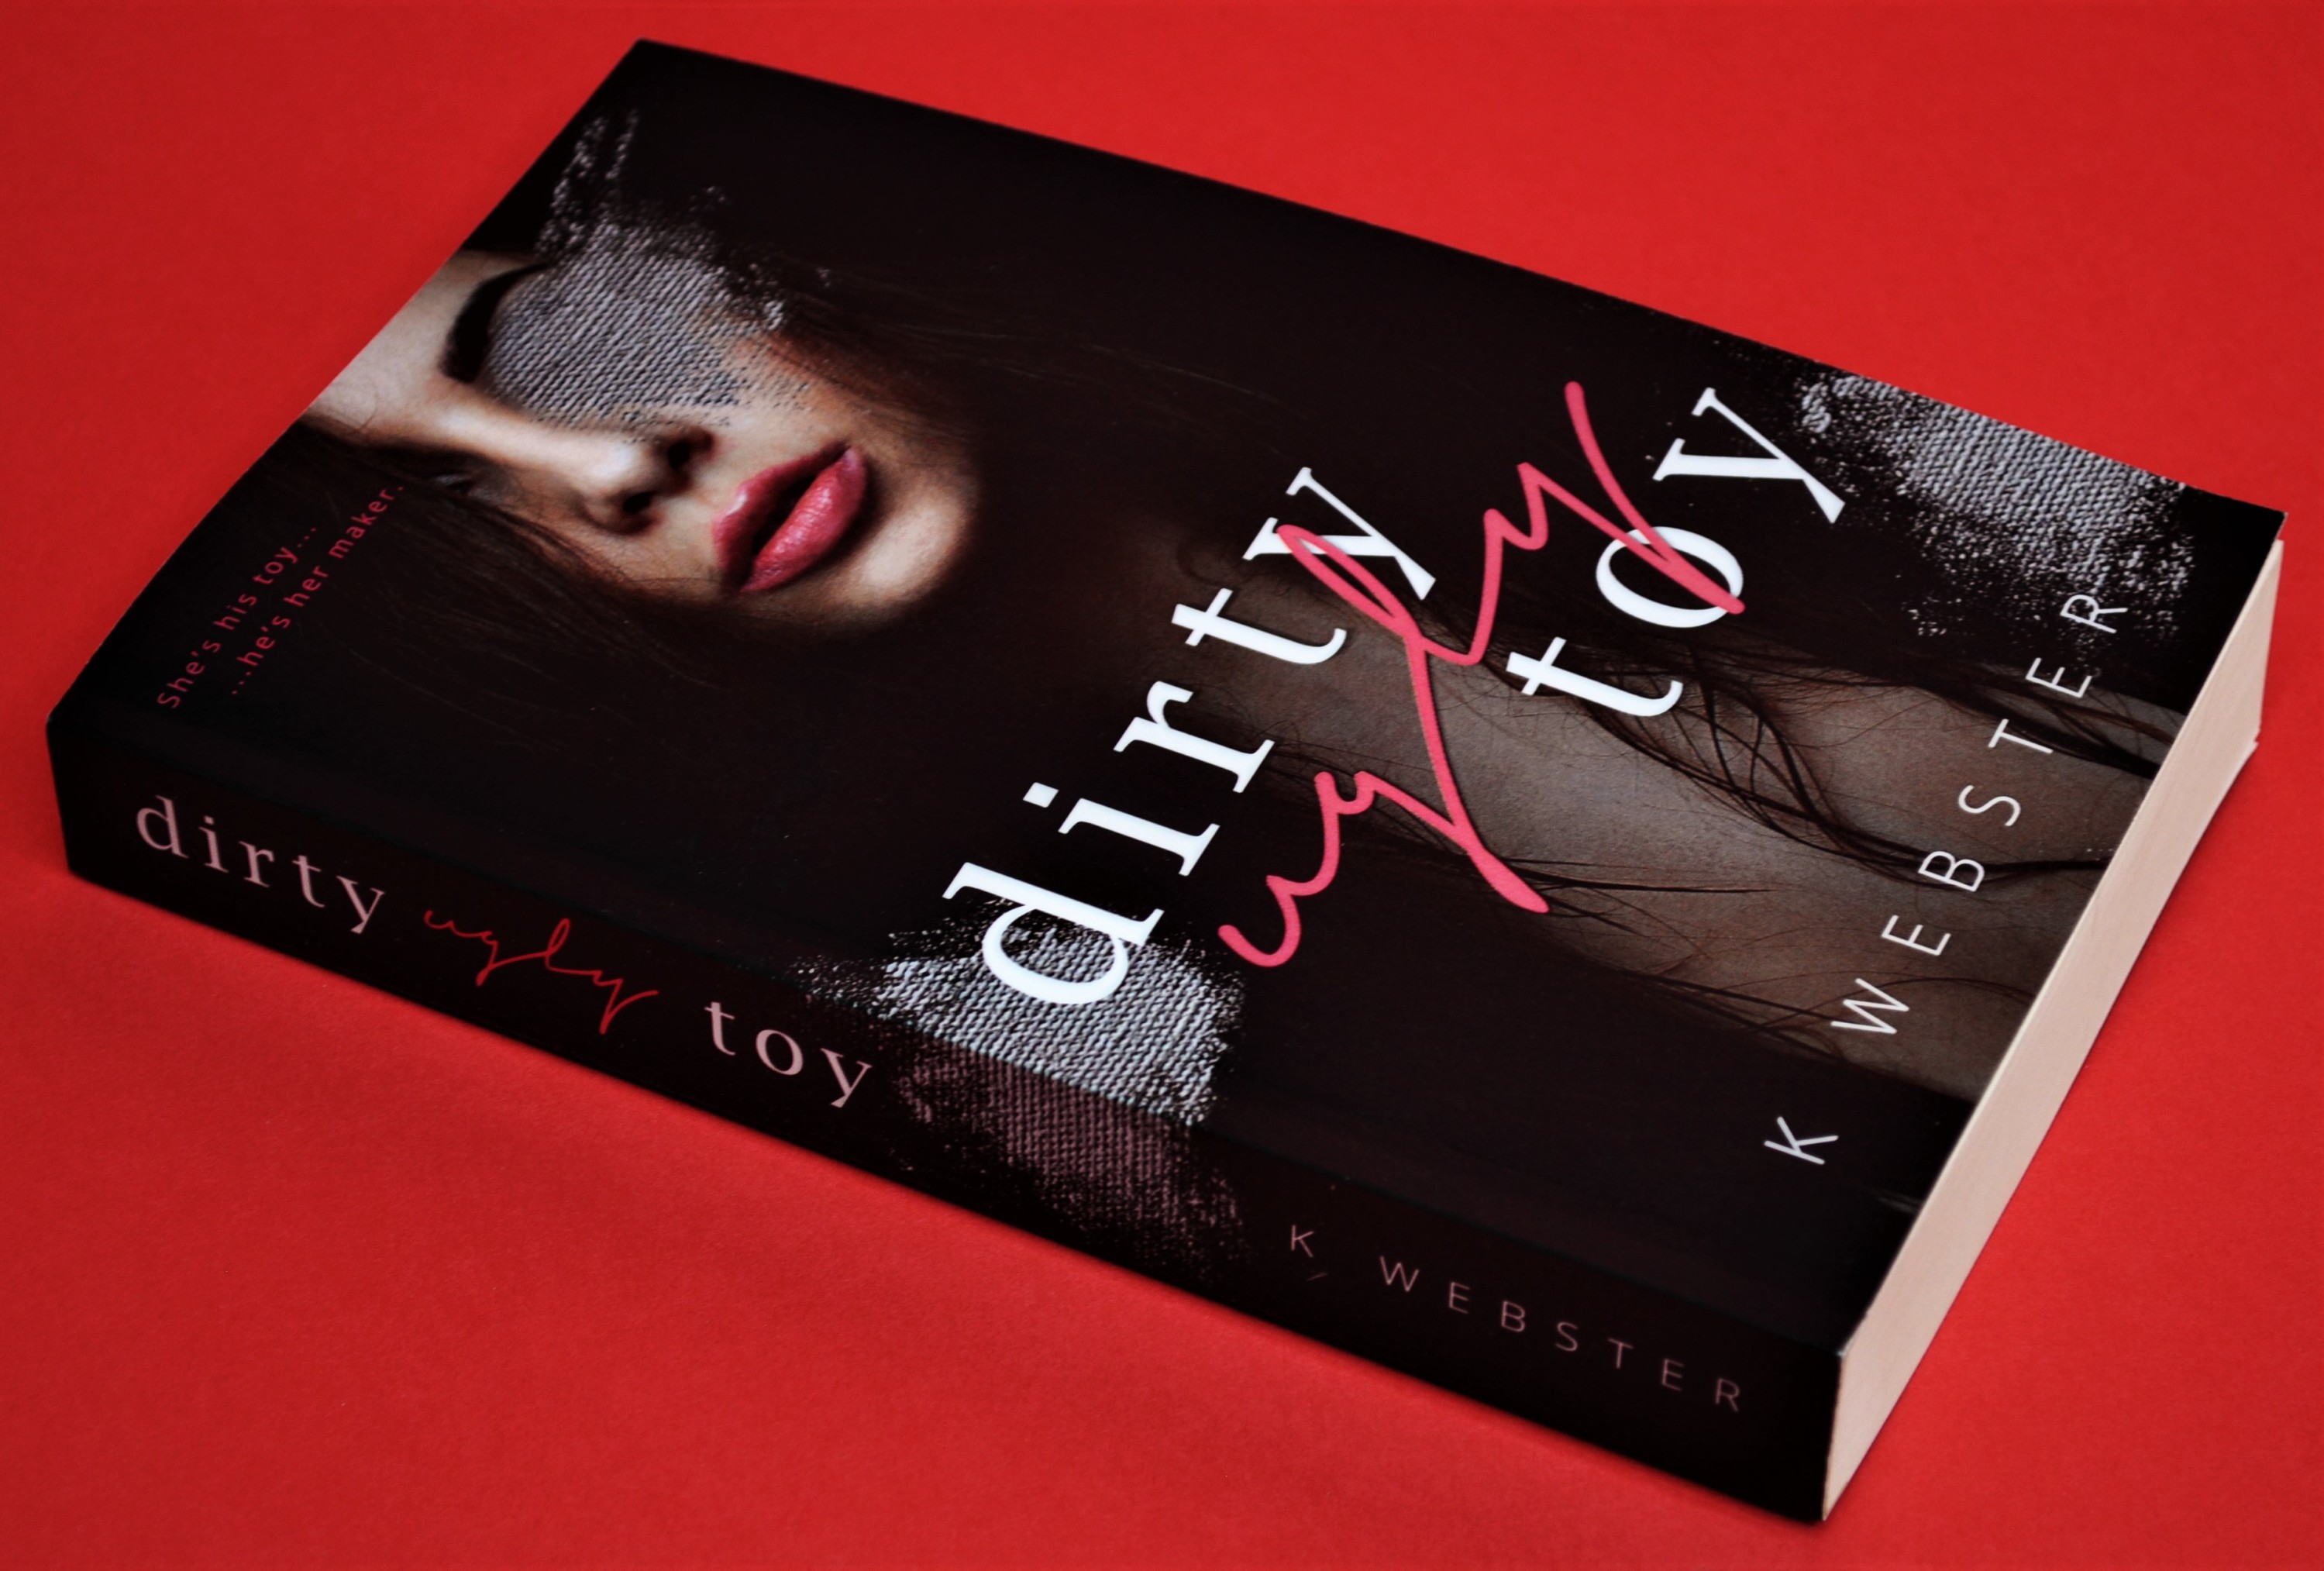 Dirty Ugly Toy, Dark Romance, K Webster, Book Review